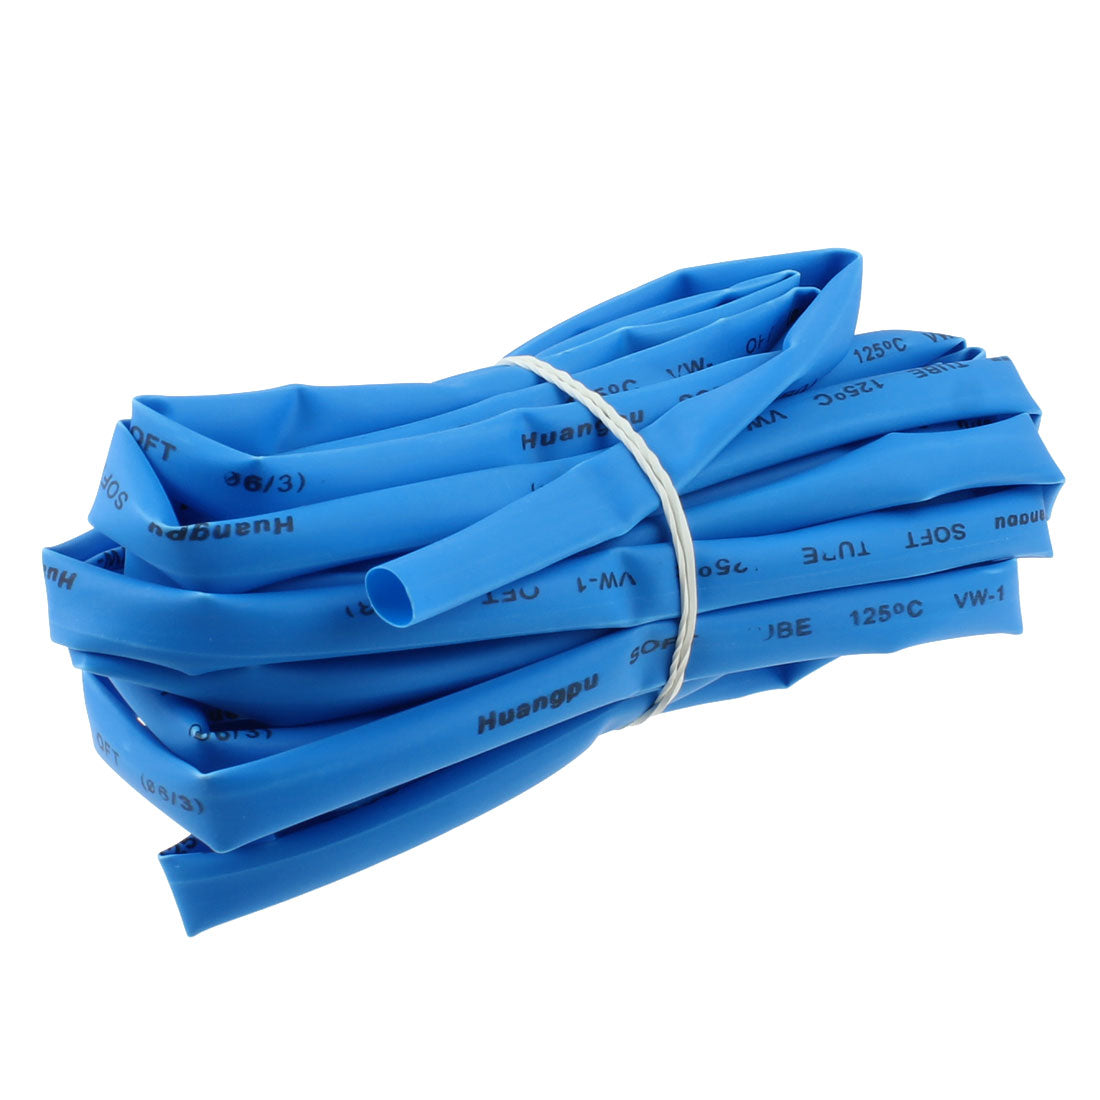 uxcell Uxcell 6mm Dia 10mm Flat width Ratio 2:1 Heat Shrinkable Tube Shrink Tubing 5M Blue